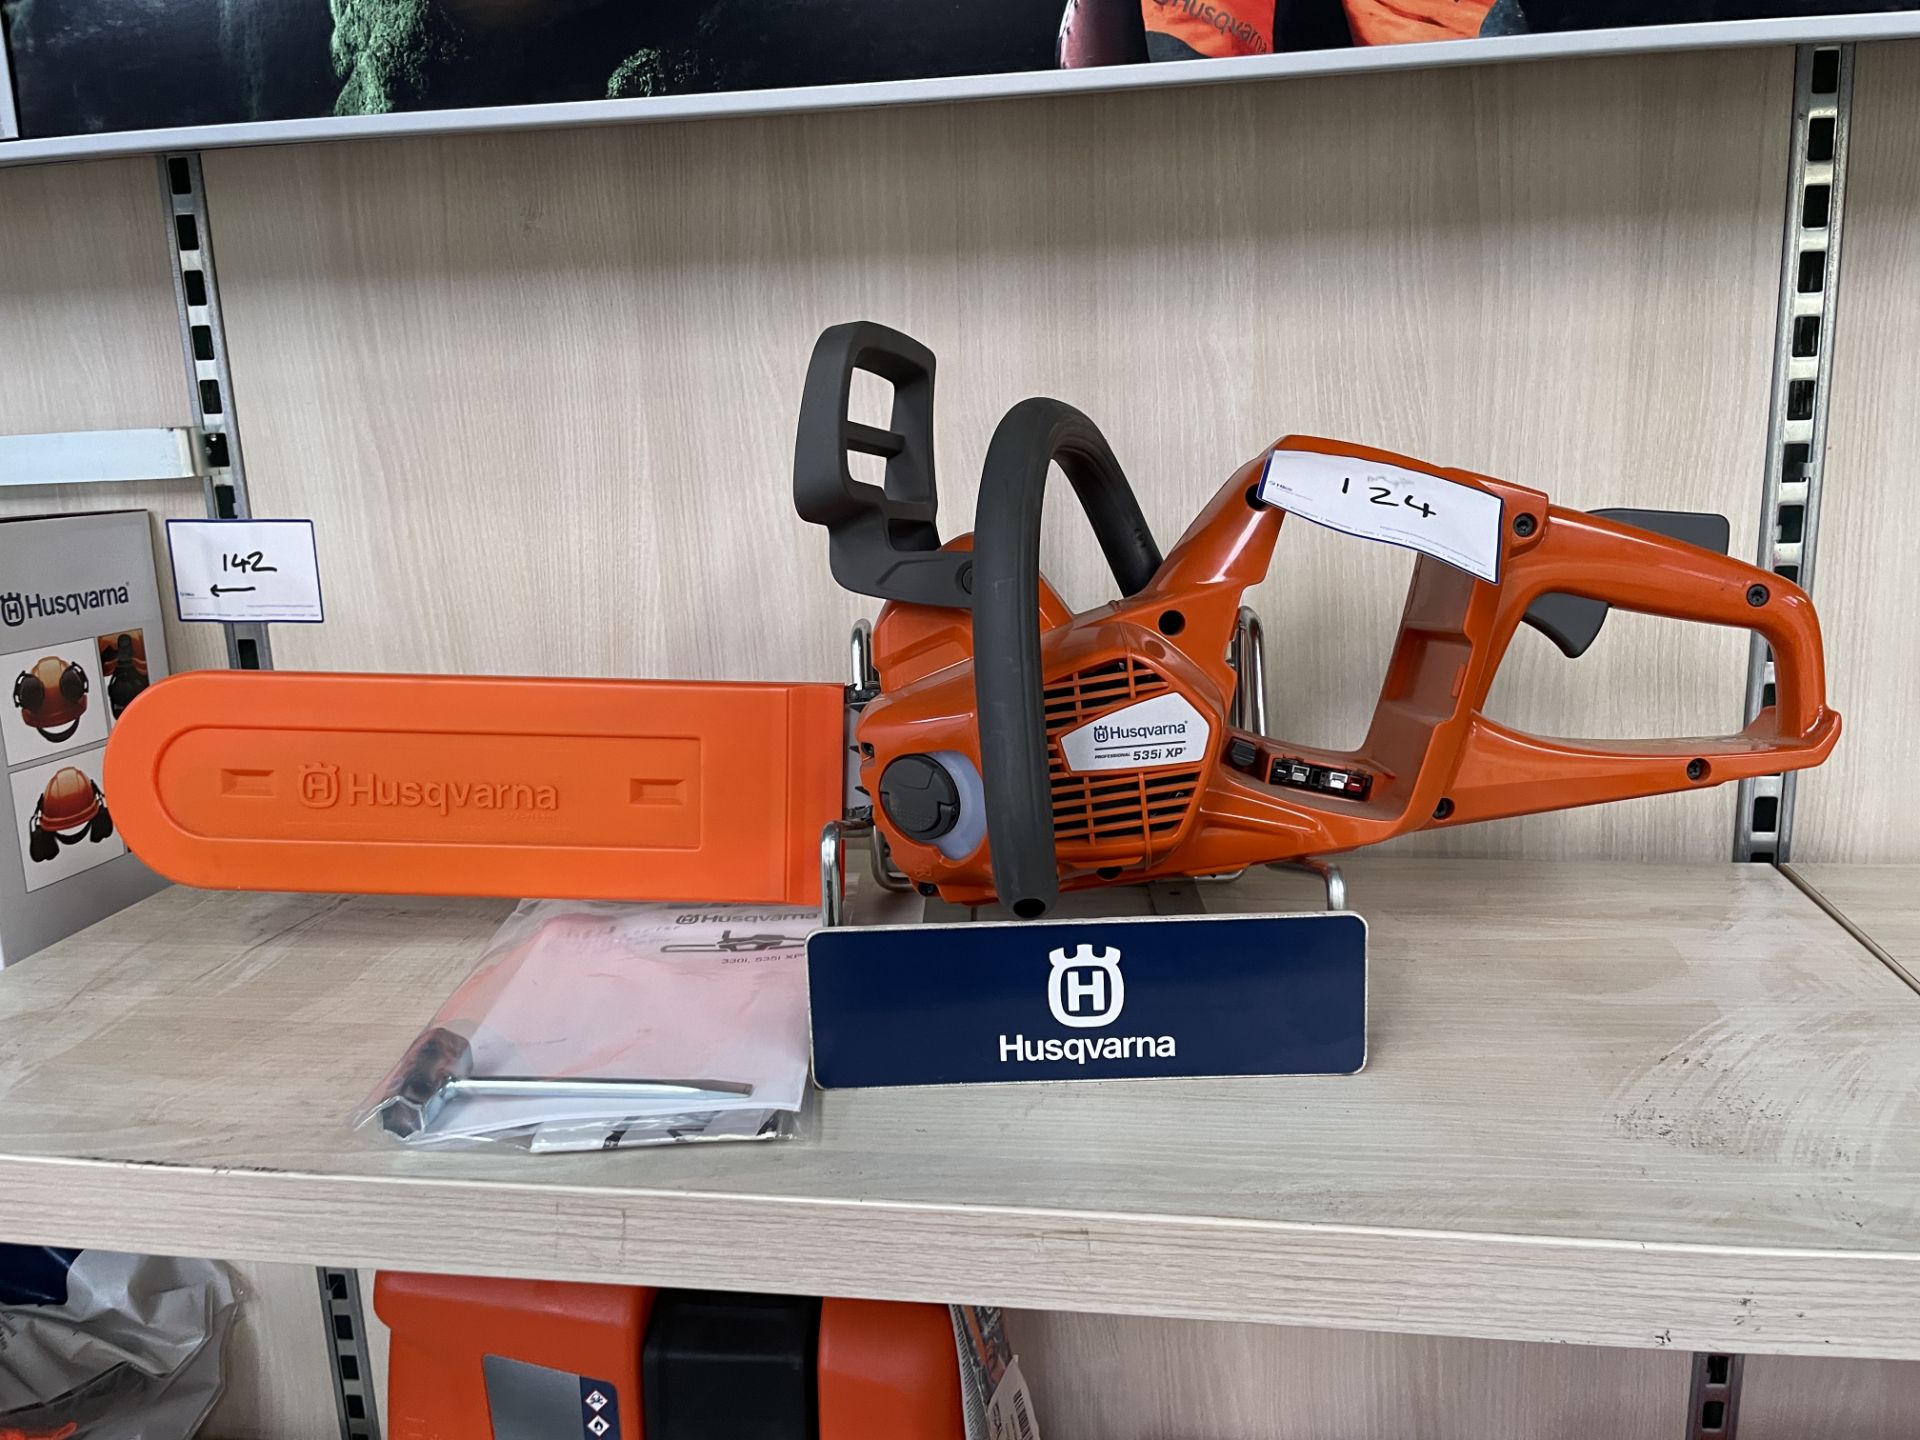 1: Husqvarna 535iXP, Chainsaw. No Battery. Serial Number: 20211600804. Year of Manufacture: 2021